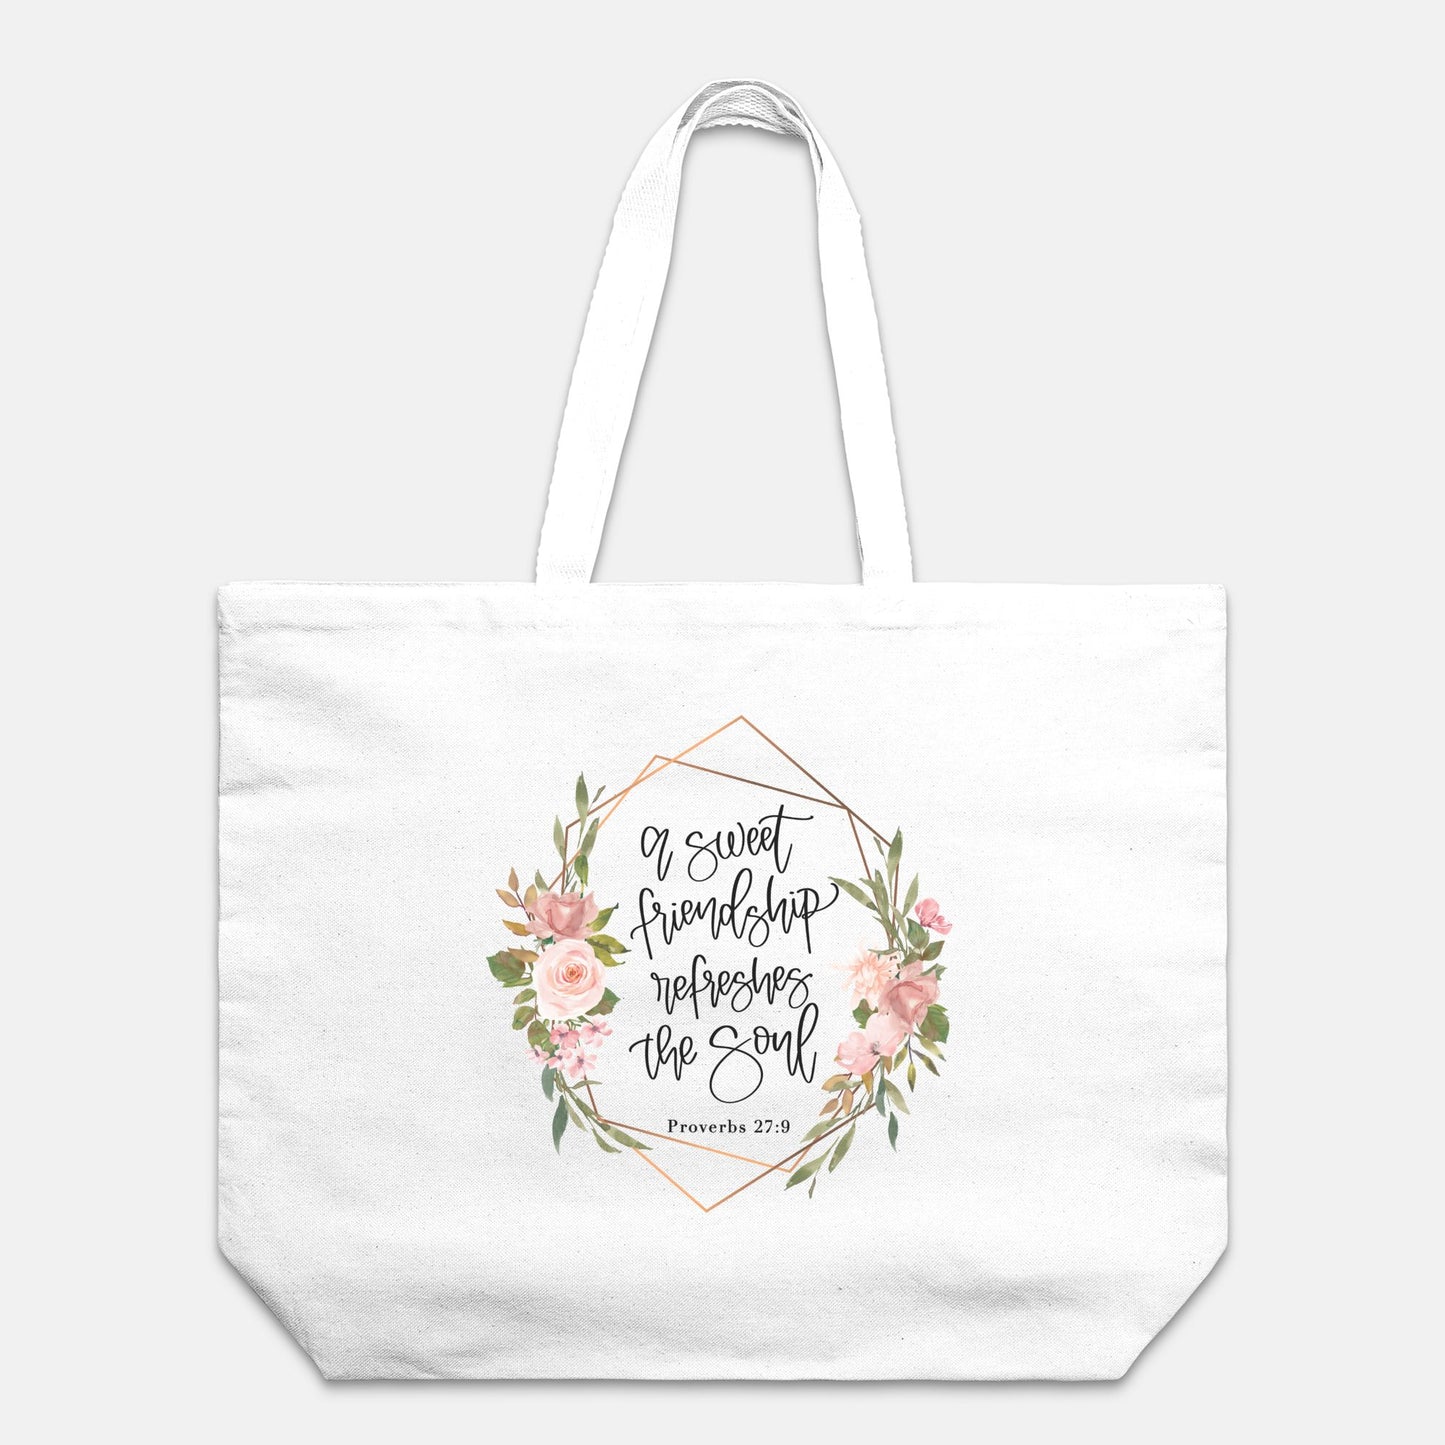 Sweet Friendship Proverbs Cotton Canvas Oversized Natural or White Tote